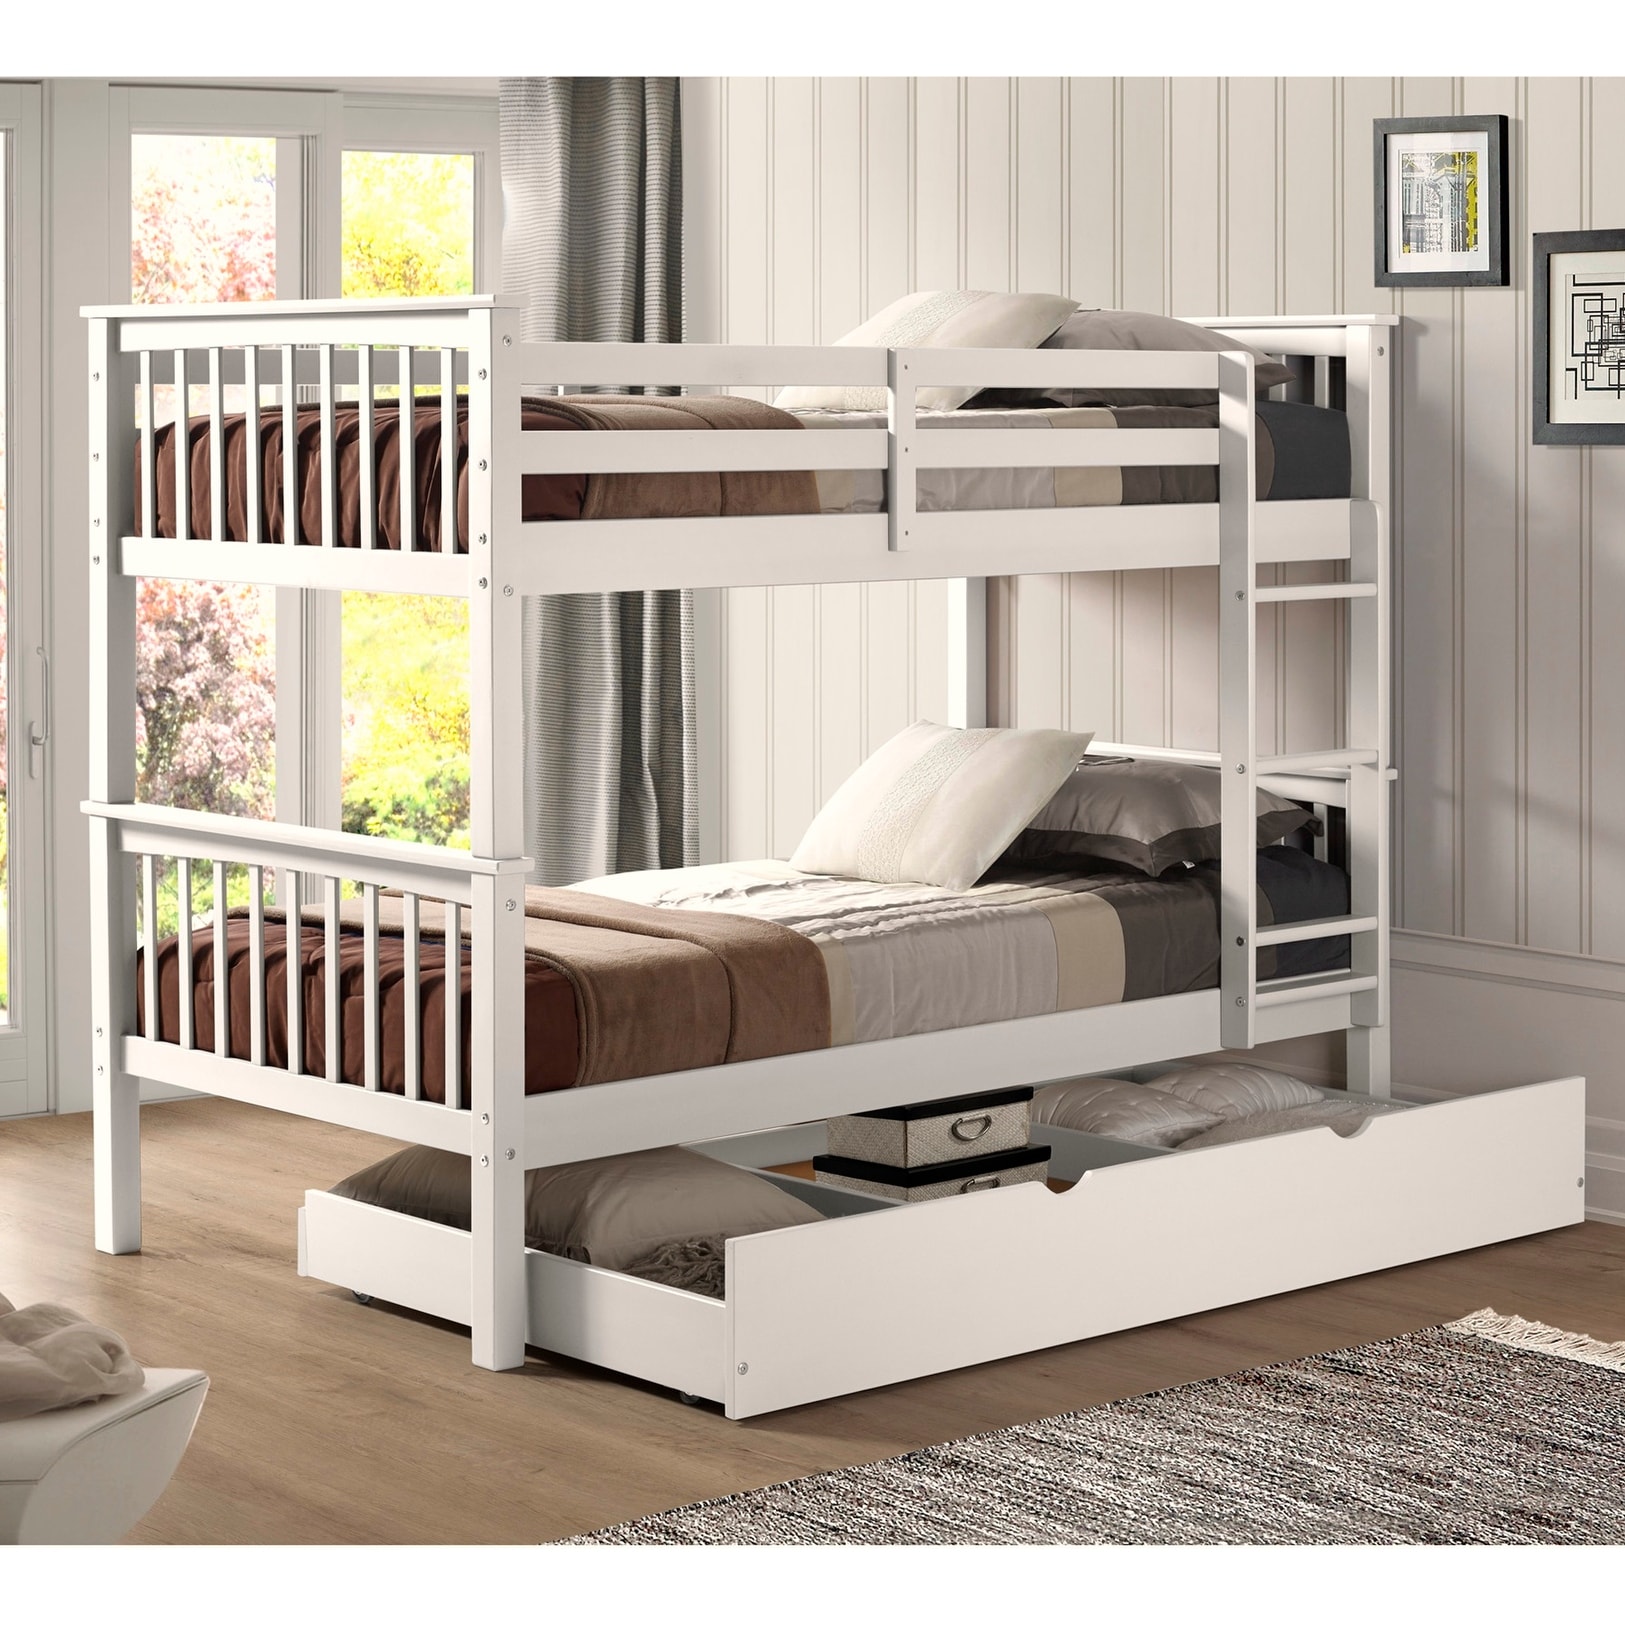 white bunk beds with mattresses